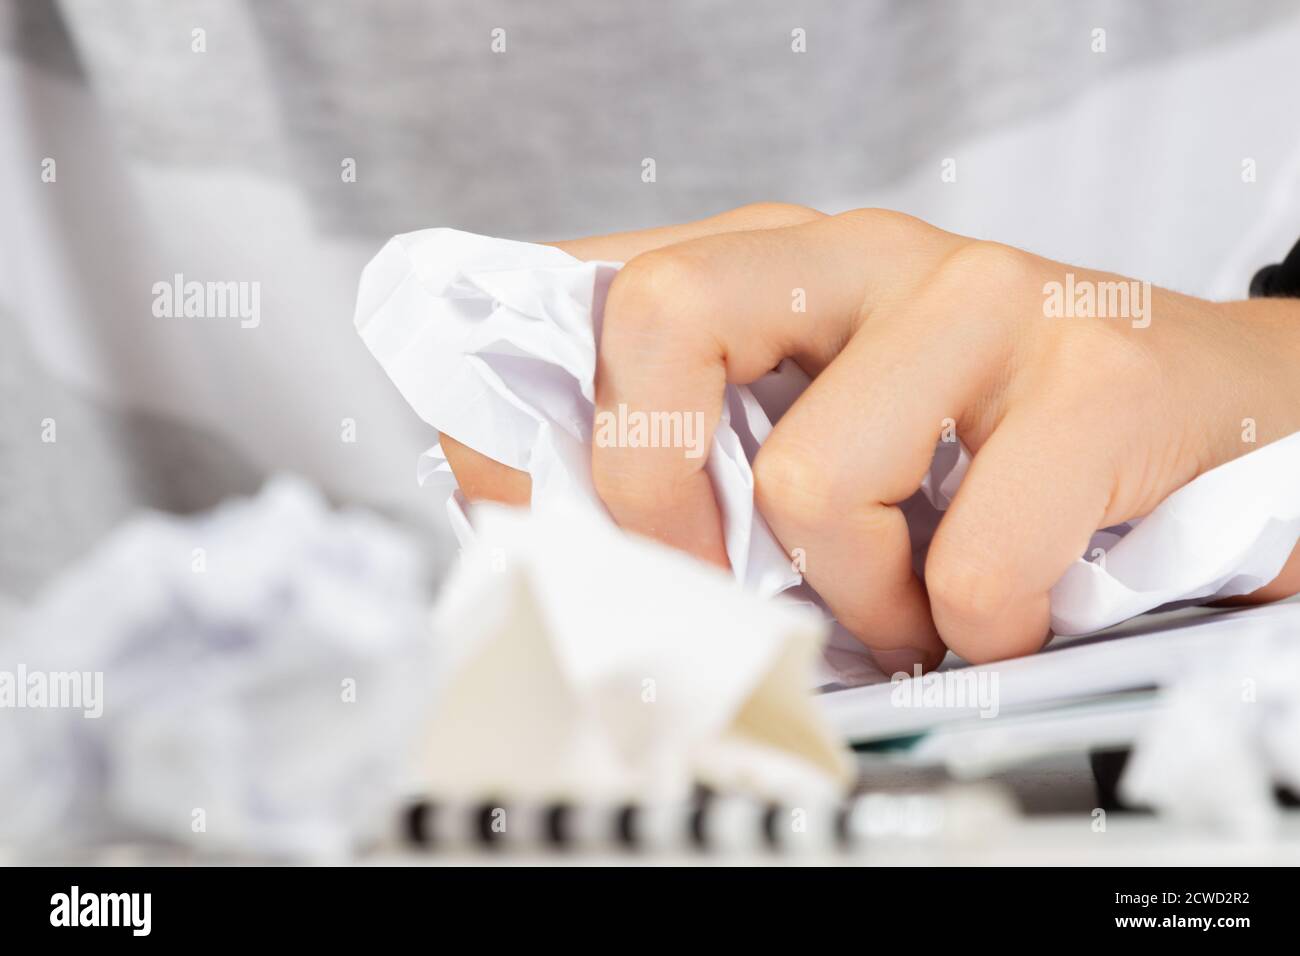 Frustrated hand squeezing a crumpled ball of paper Stock Photo